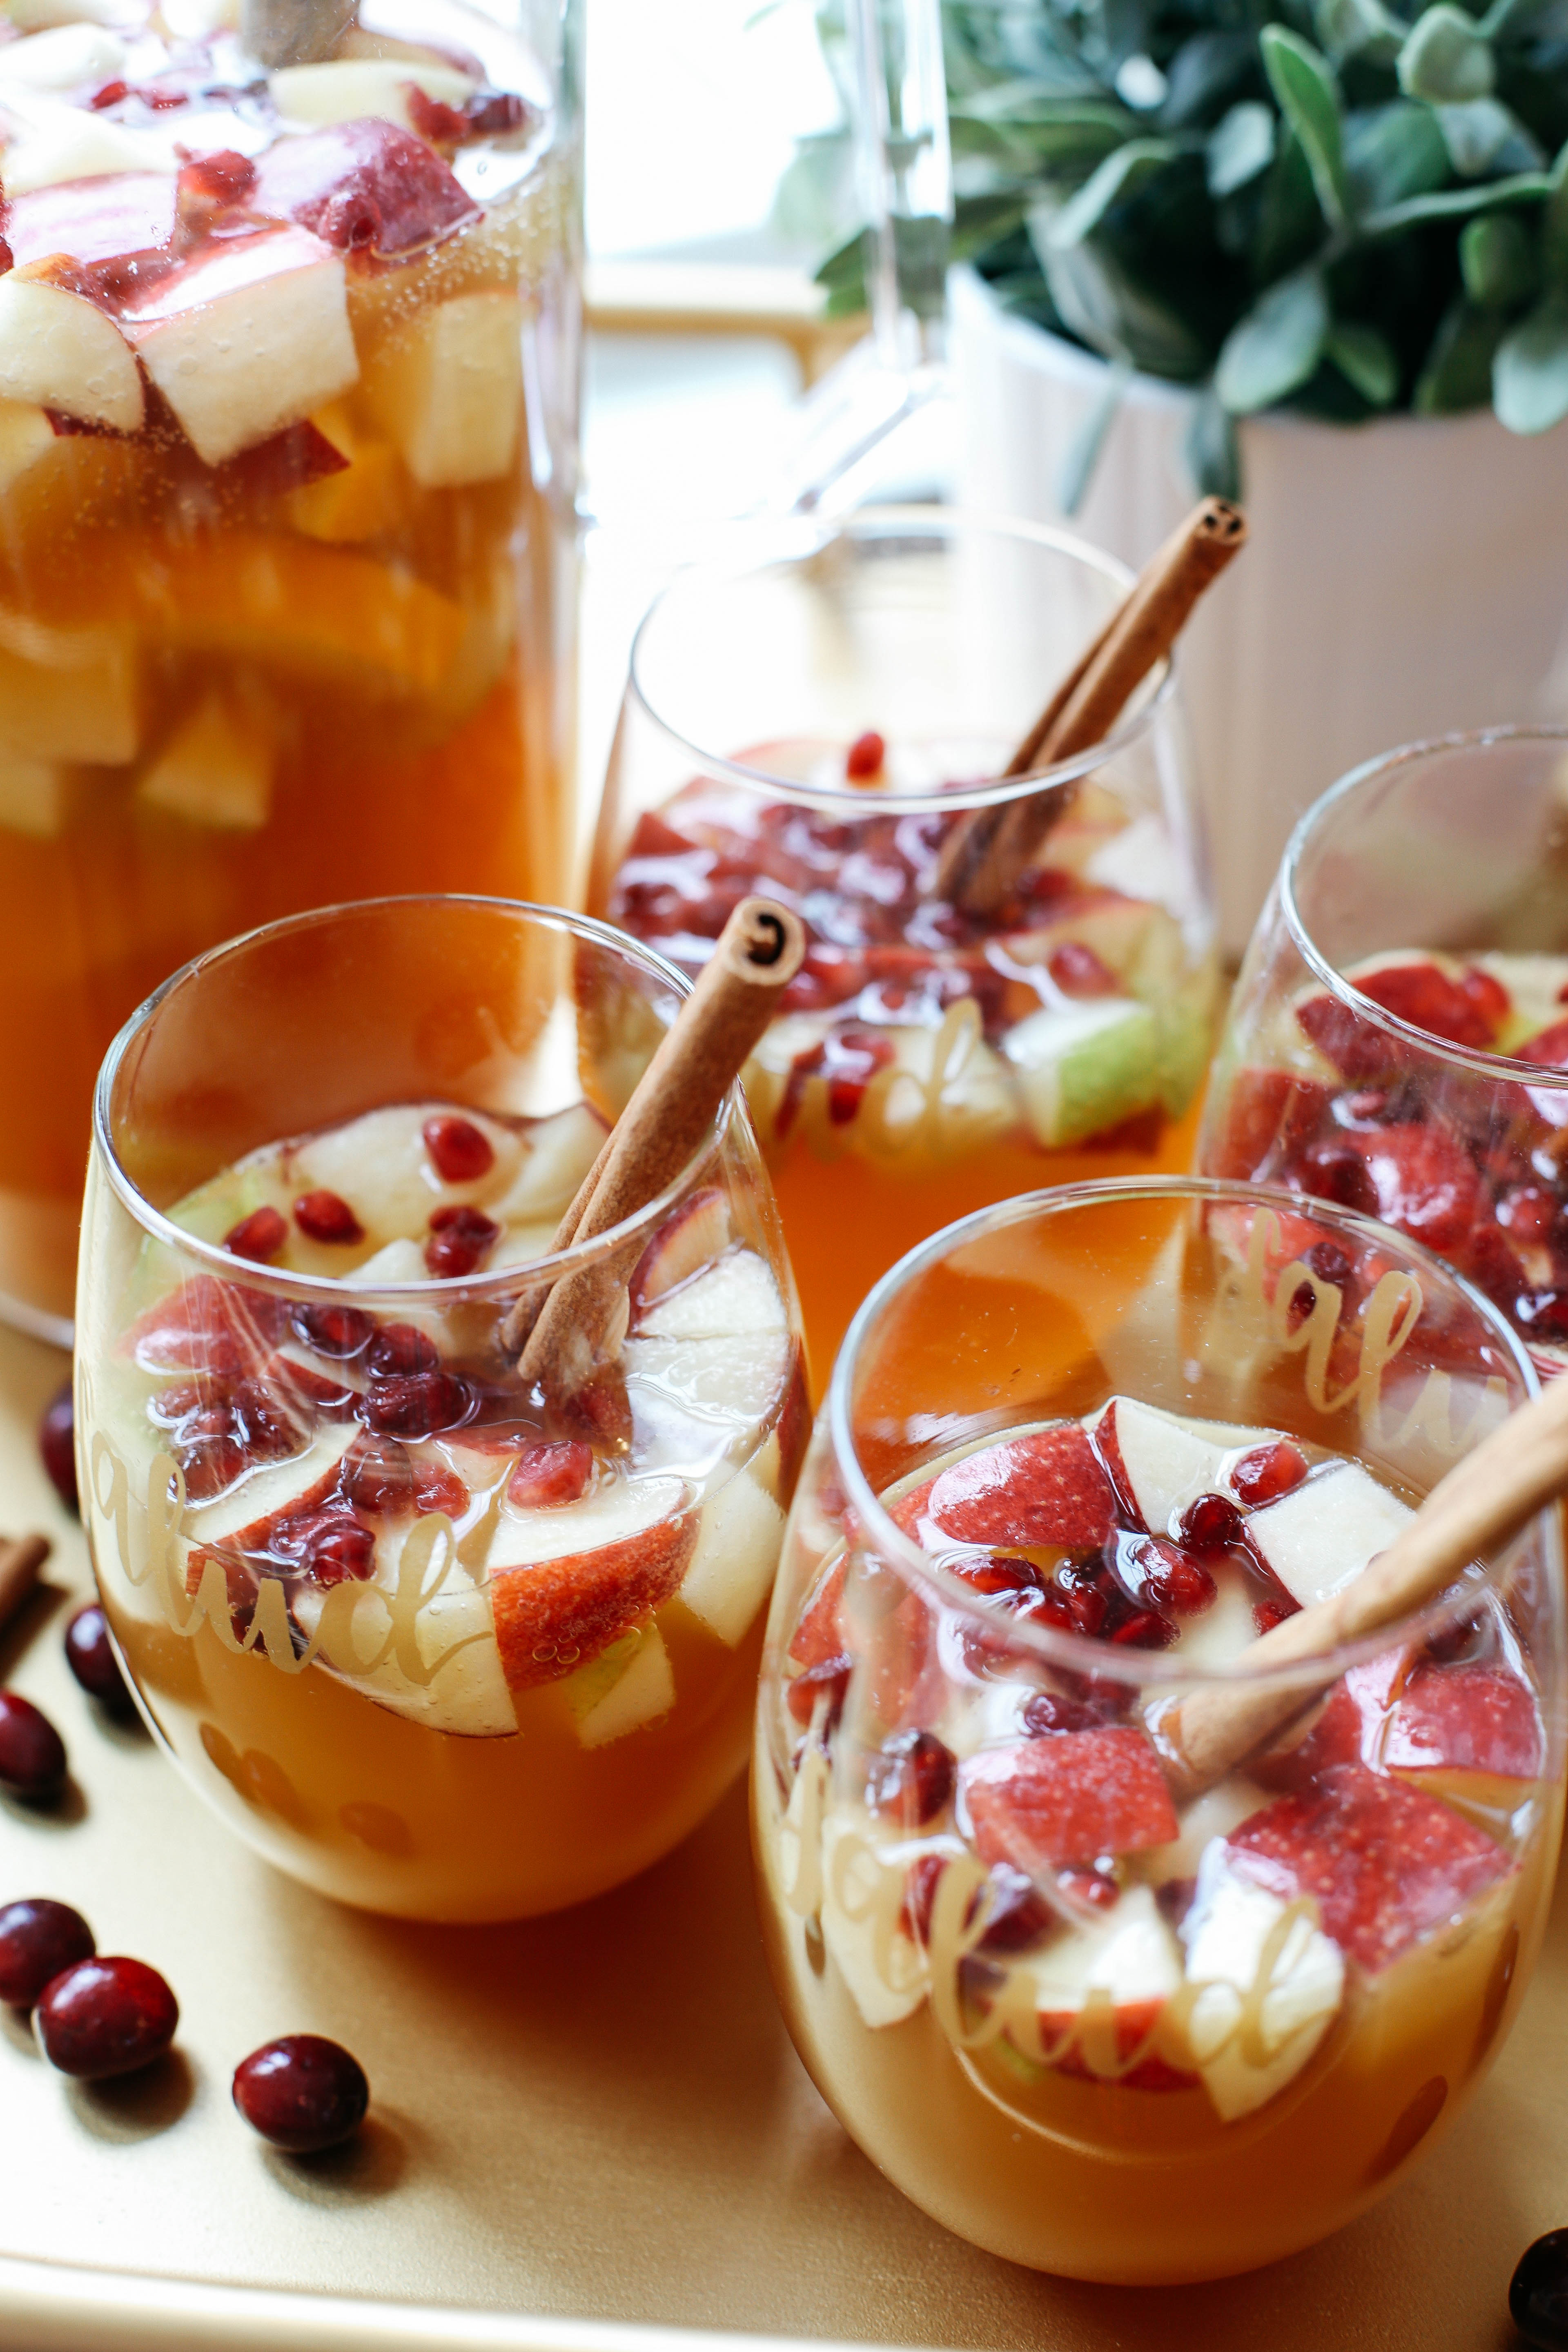 This Fall Harvest Sangria is the perfect holiday cocktail filled with crisp apples, pears, cranberries, cinnamon sticks and fresh apple cider!